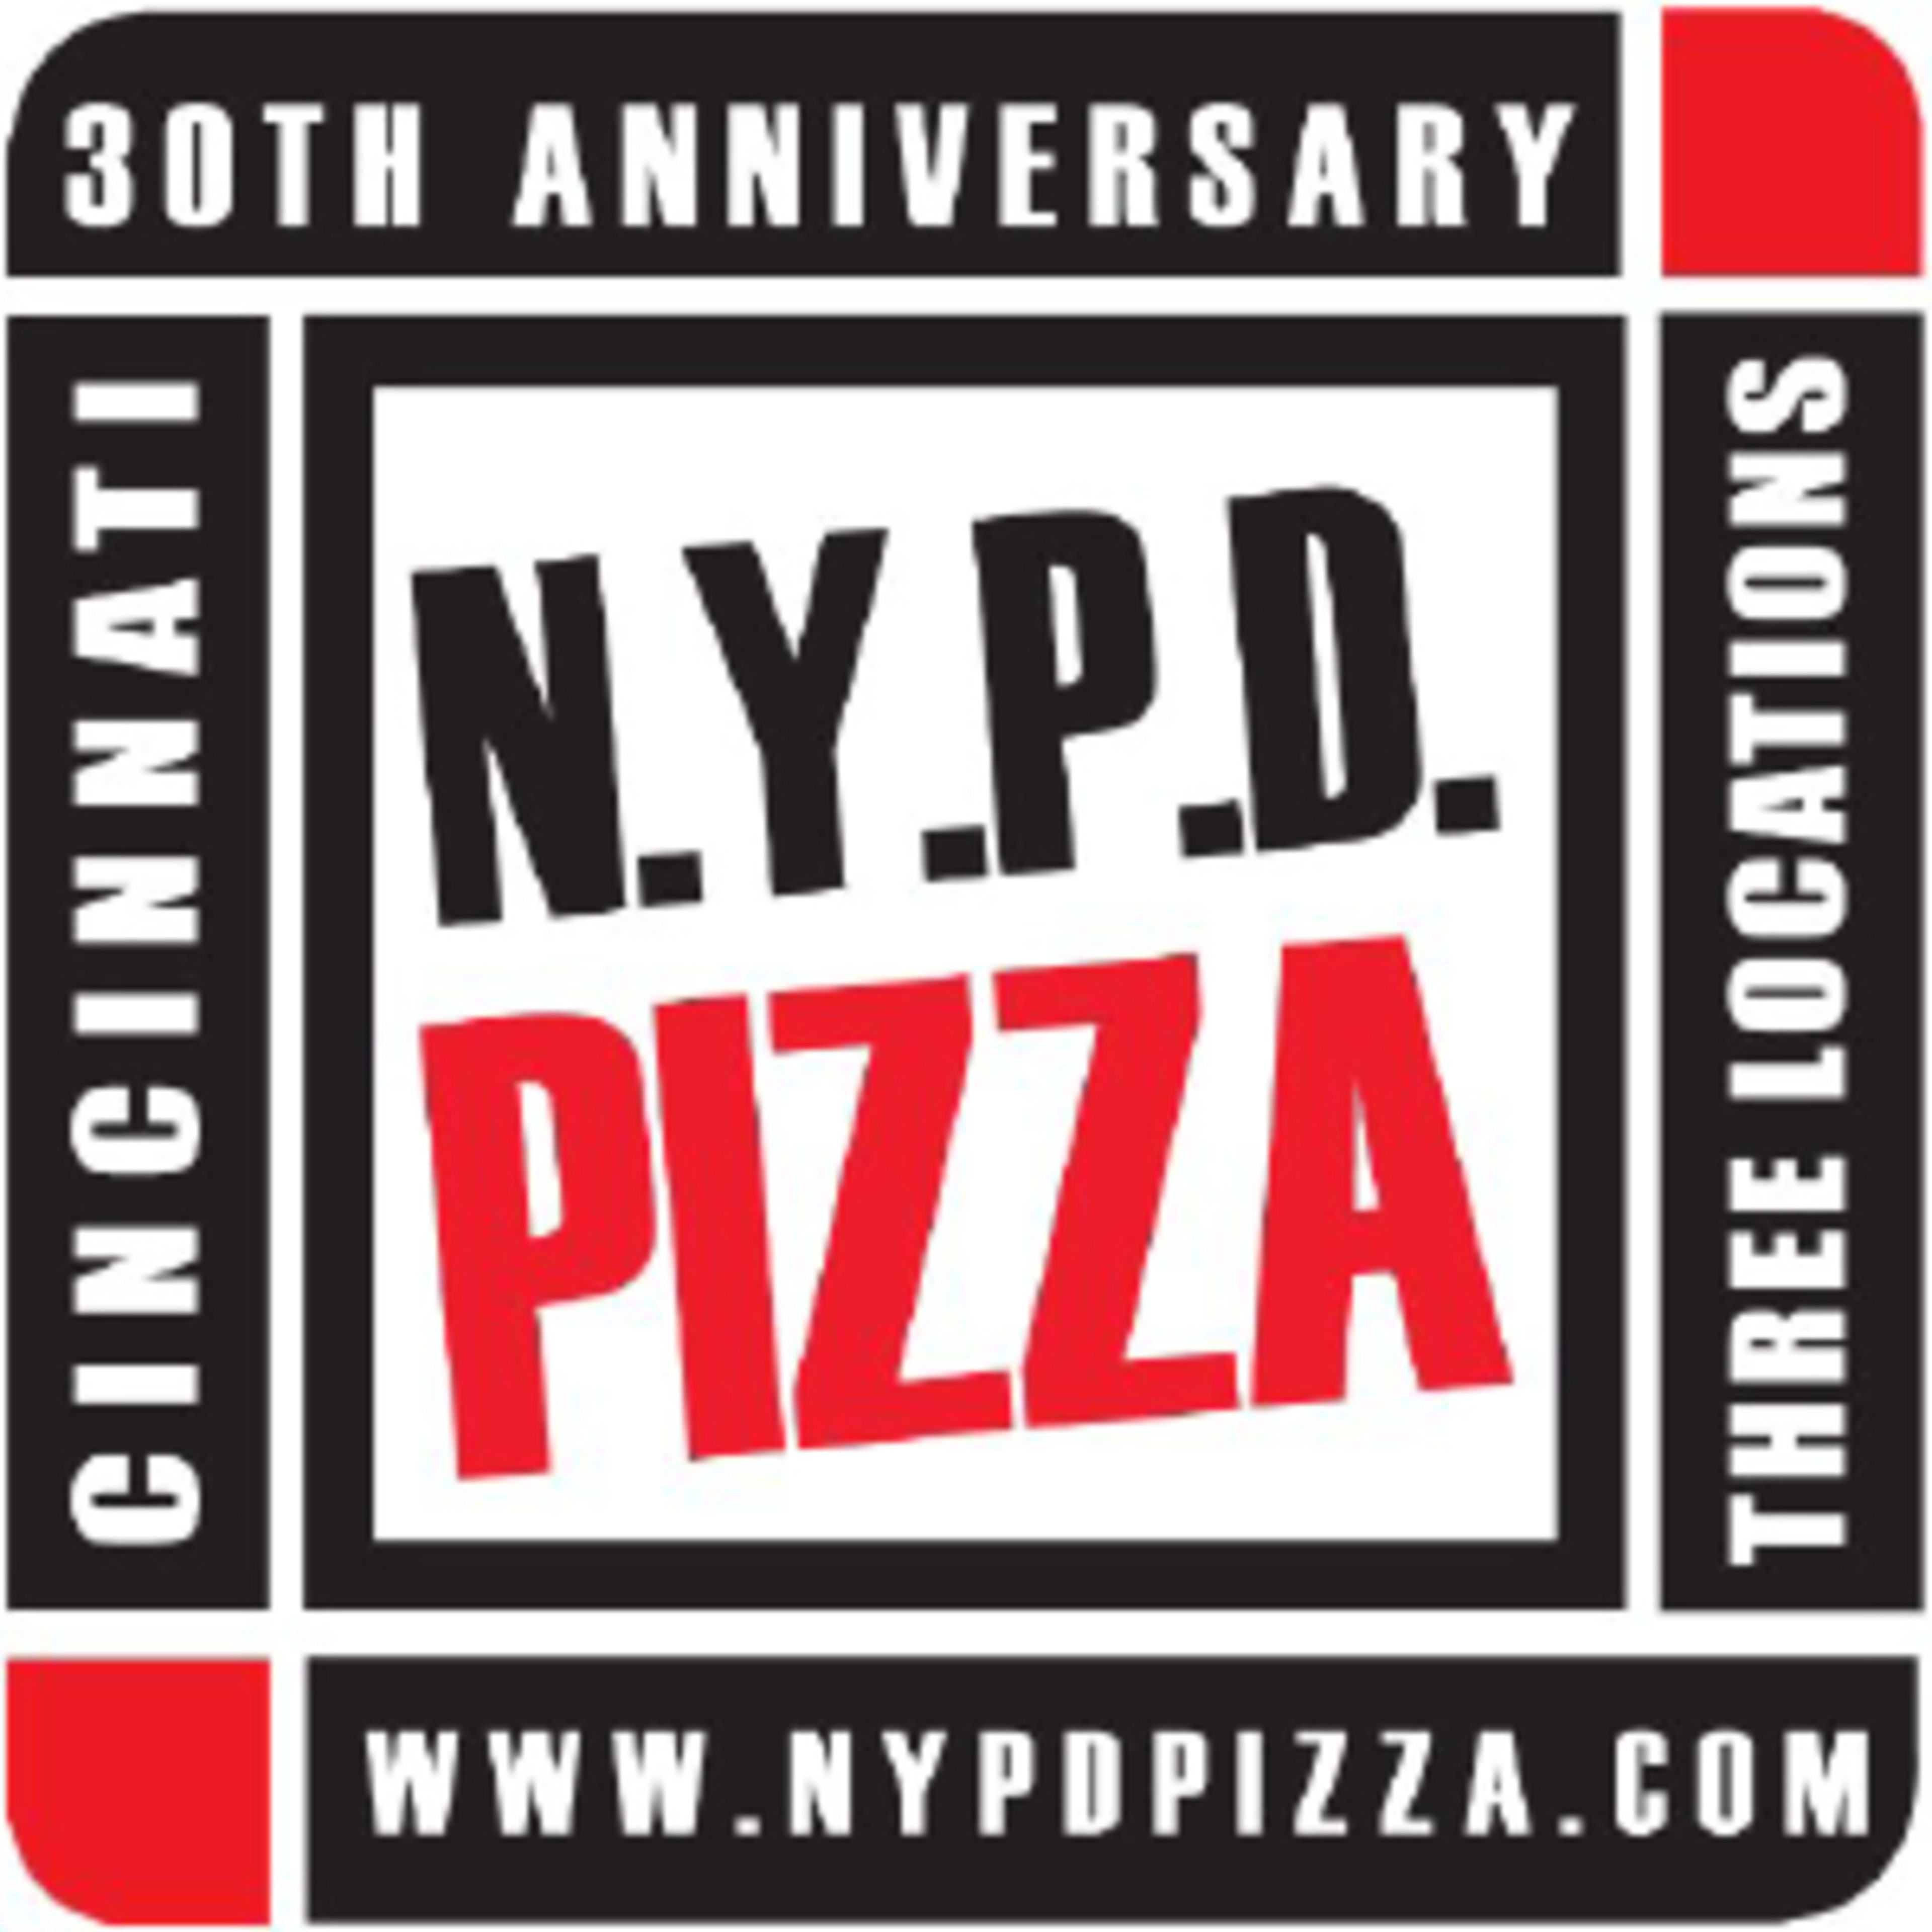 N.Y.P.D. Pizza DeliveryCode